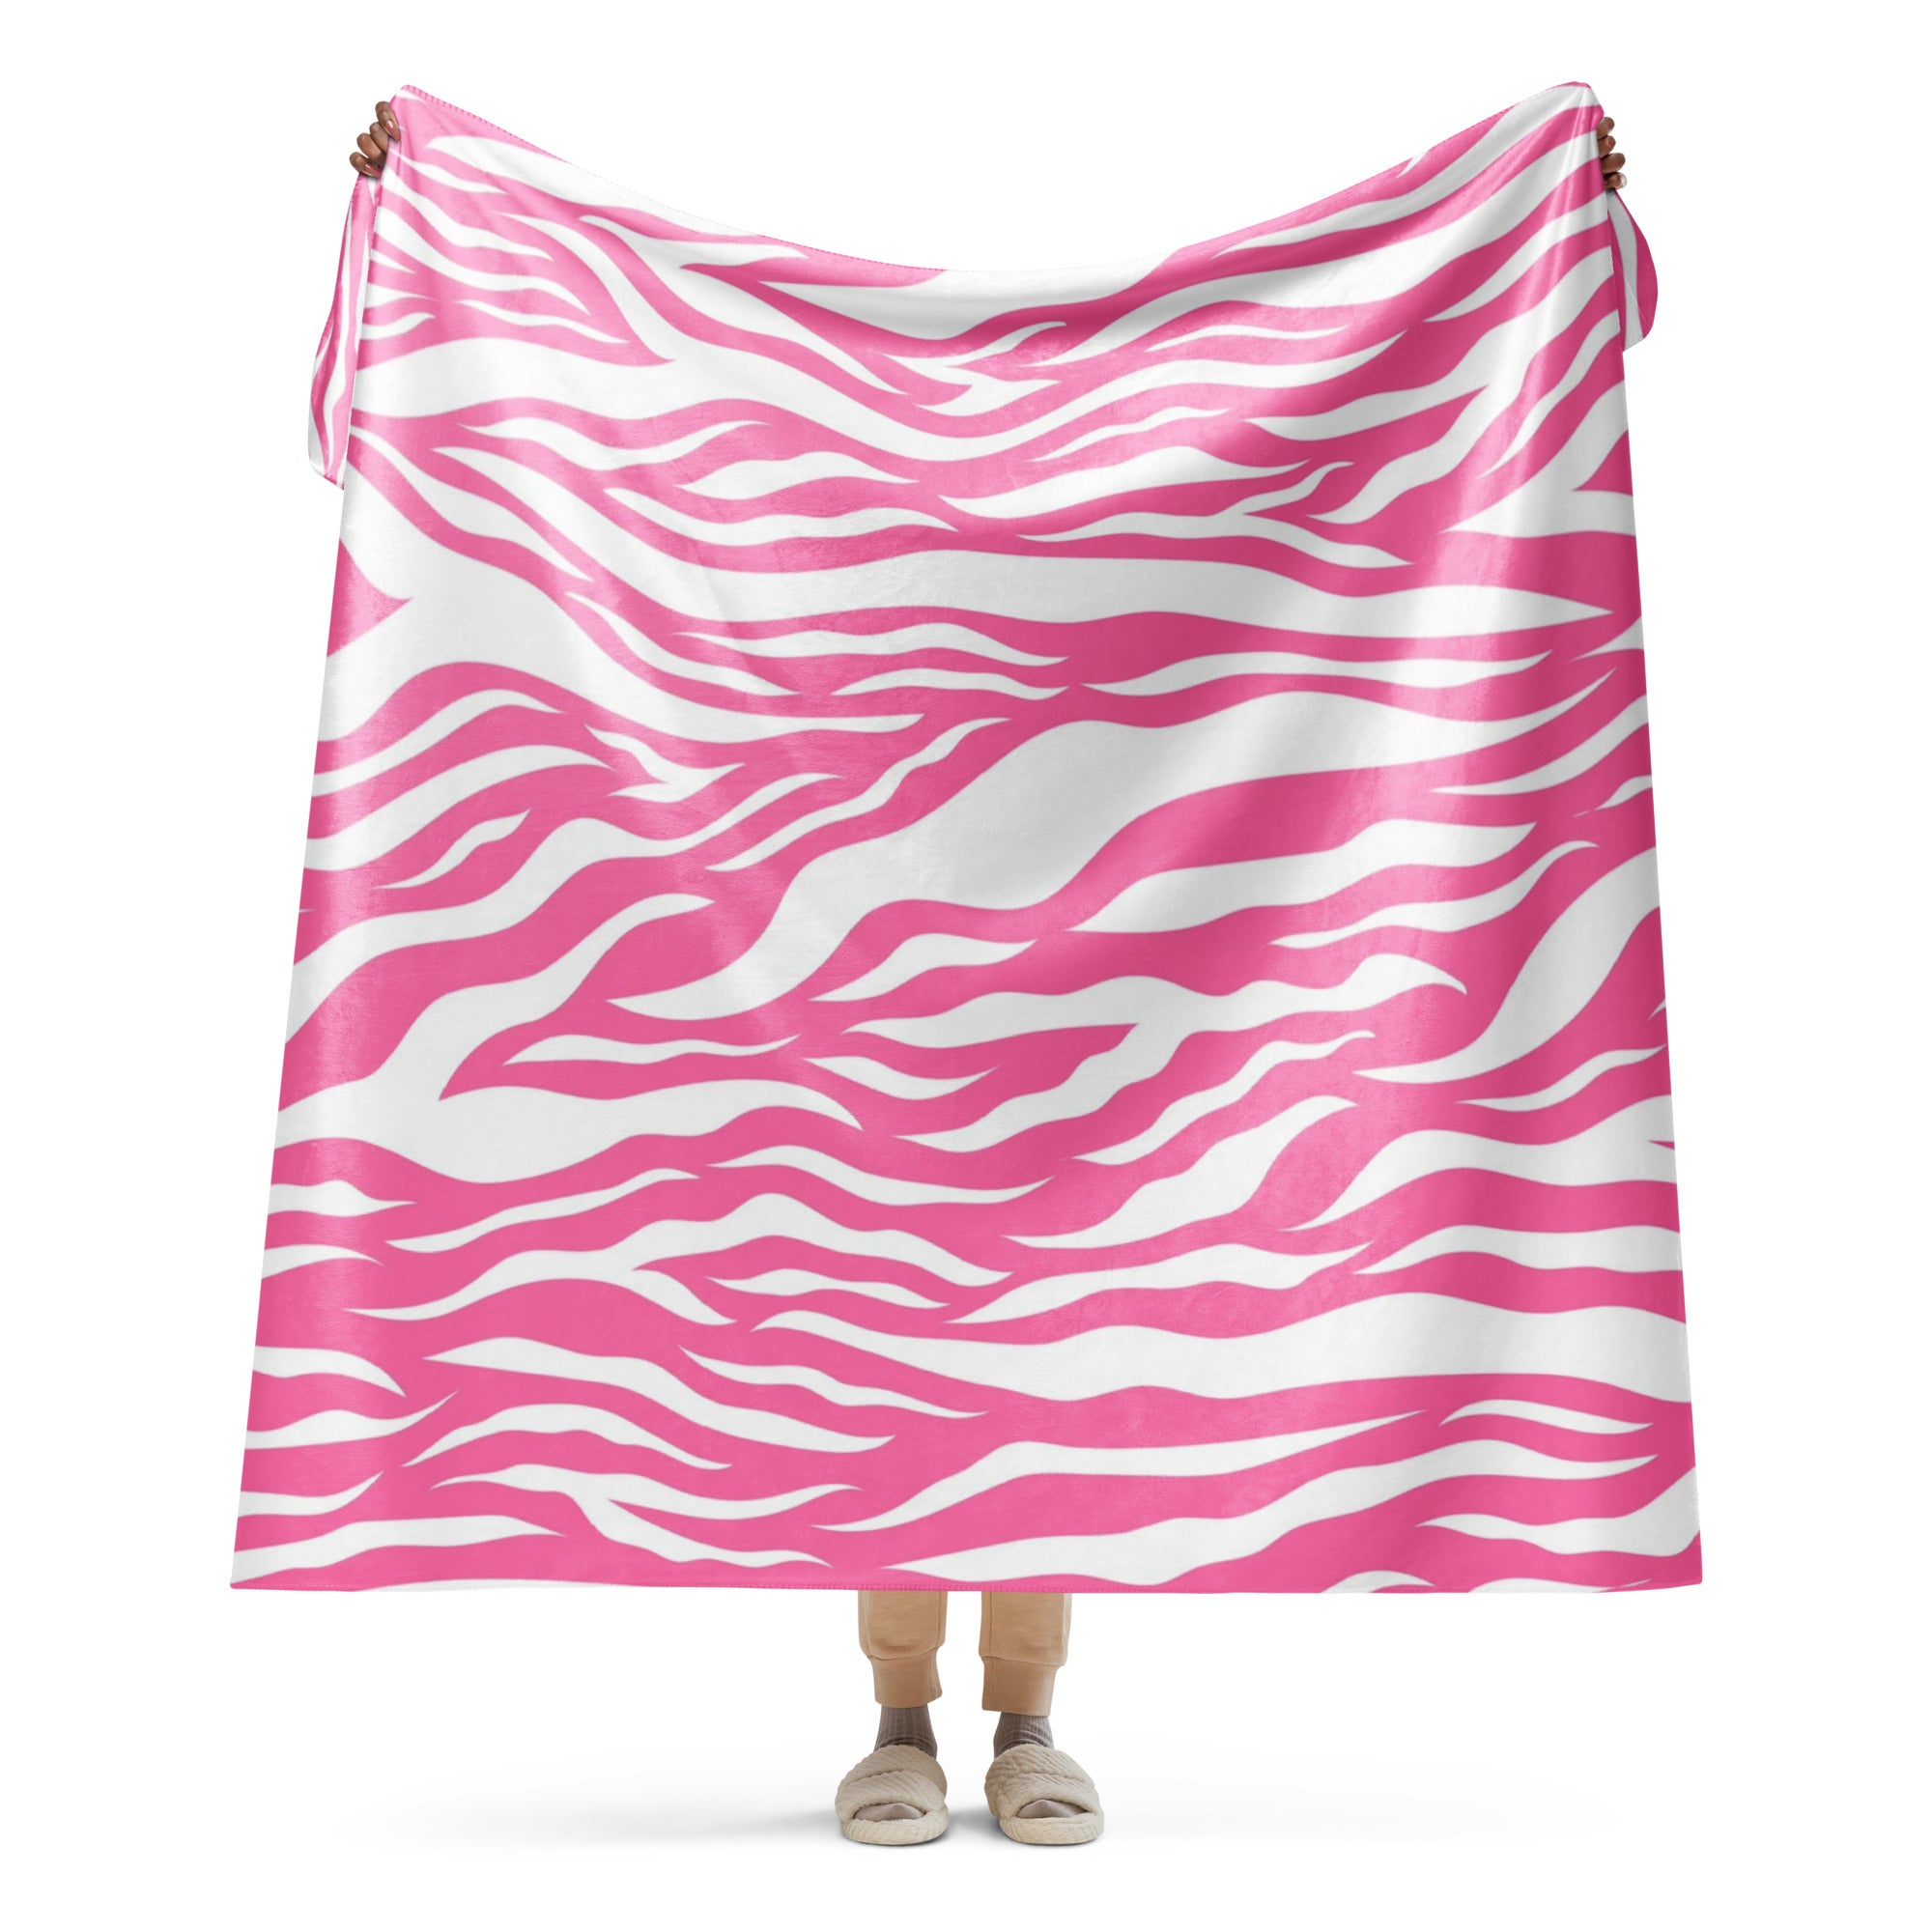 Pink and White Zebra Print Sherpa blanket lioness-love